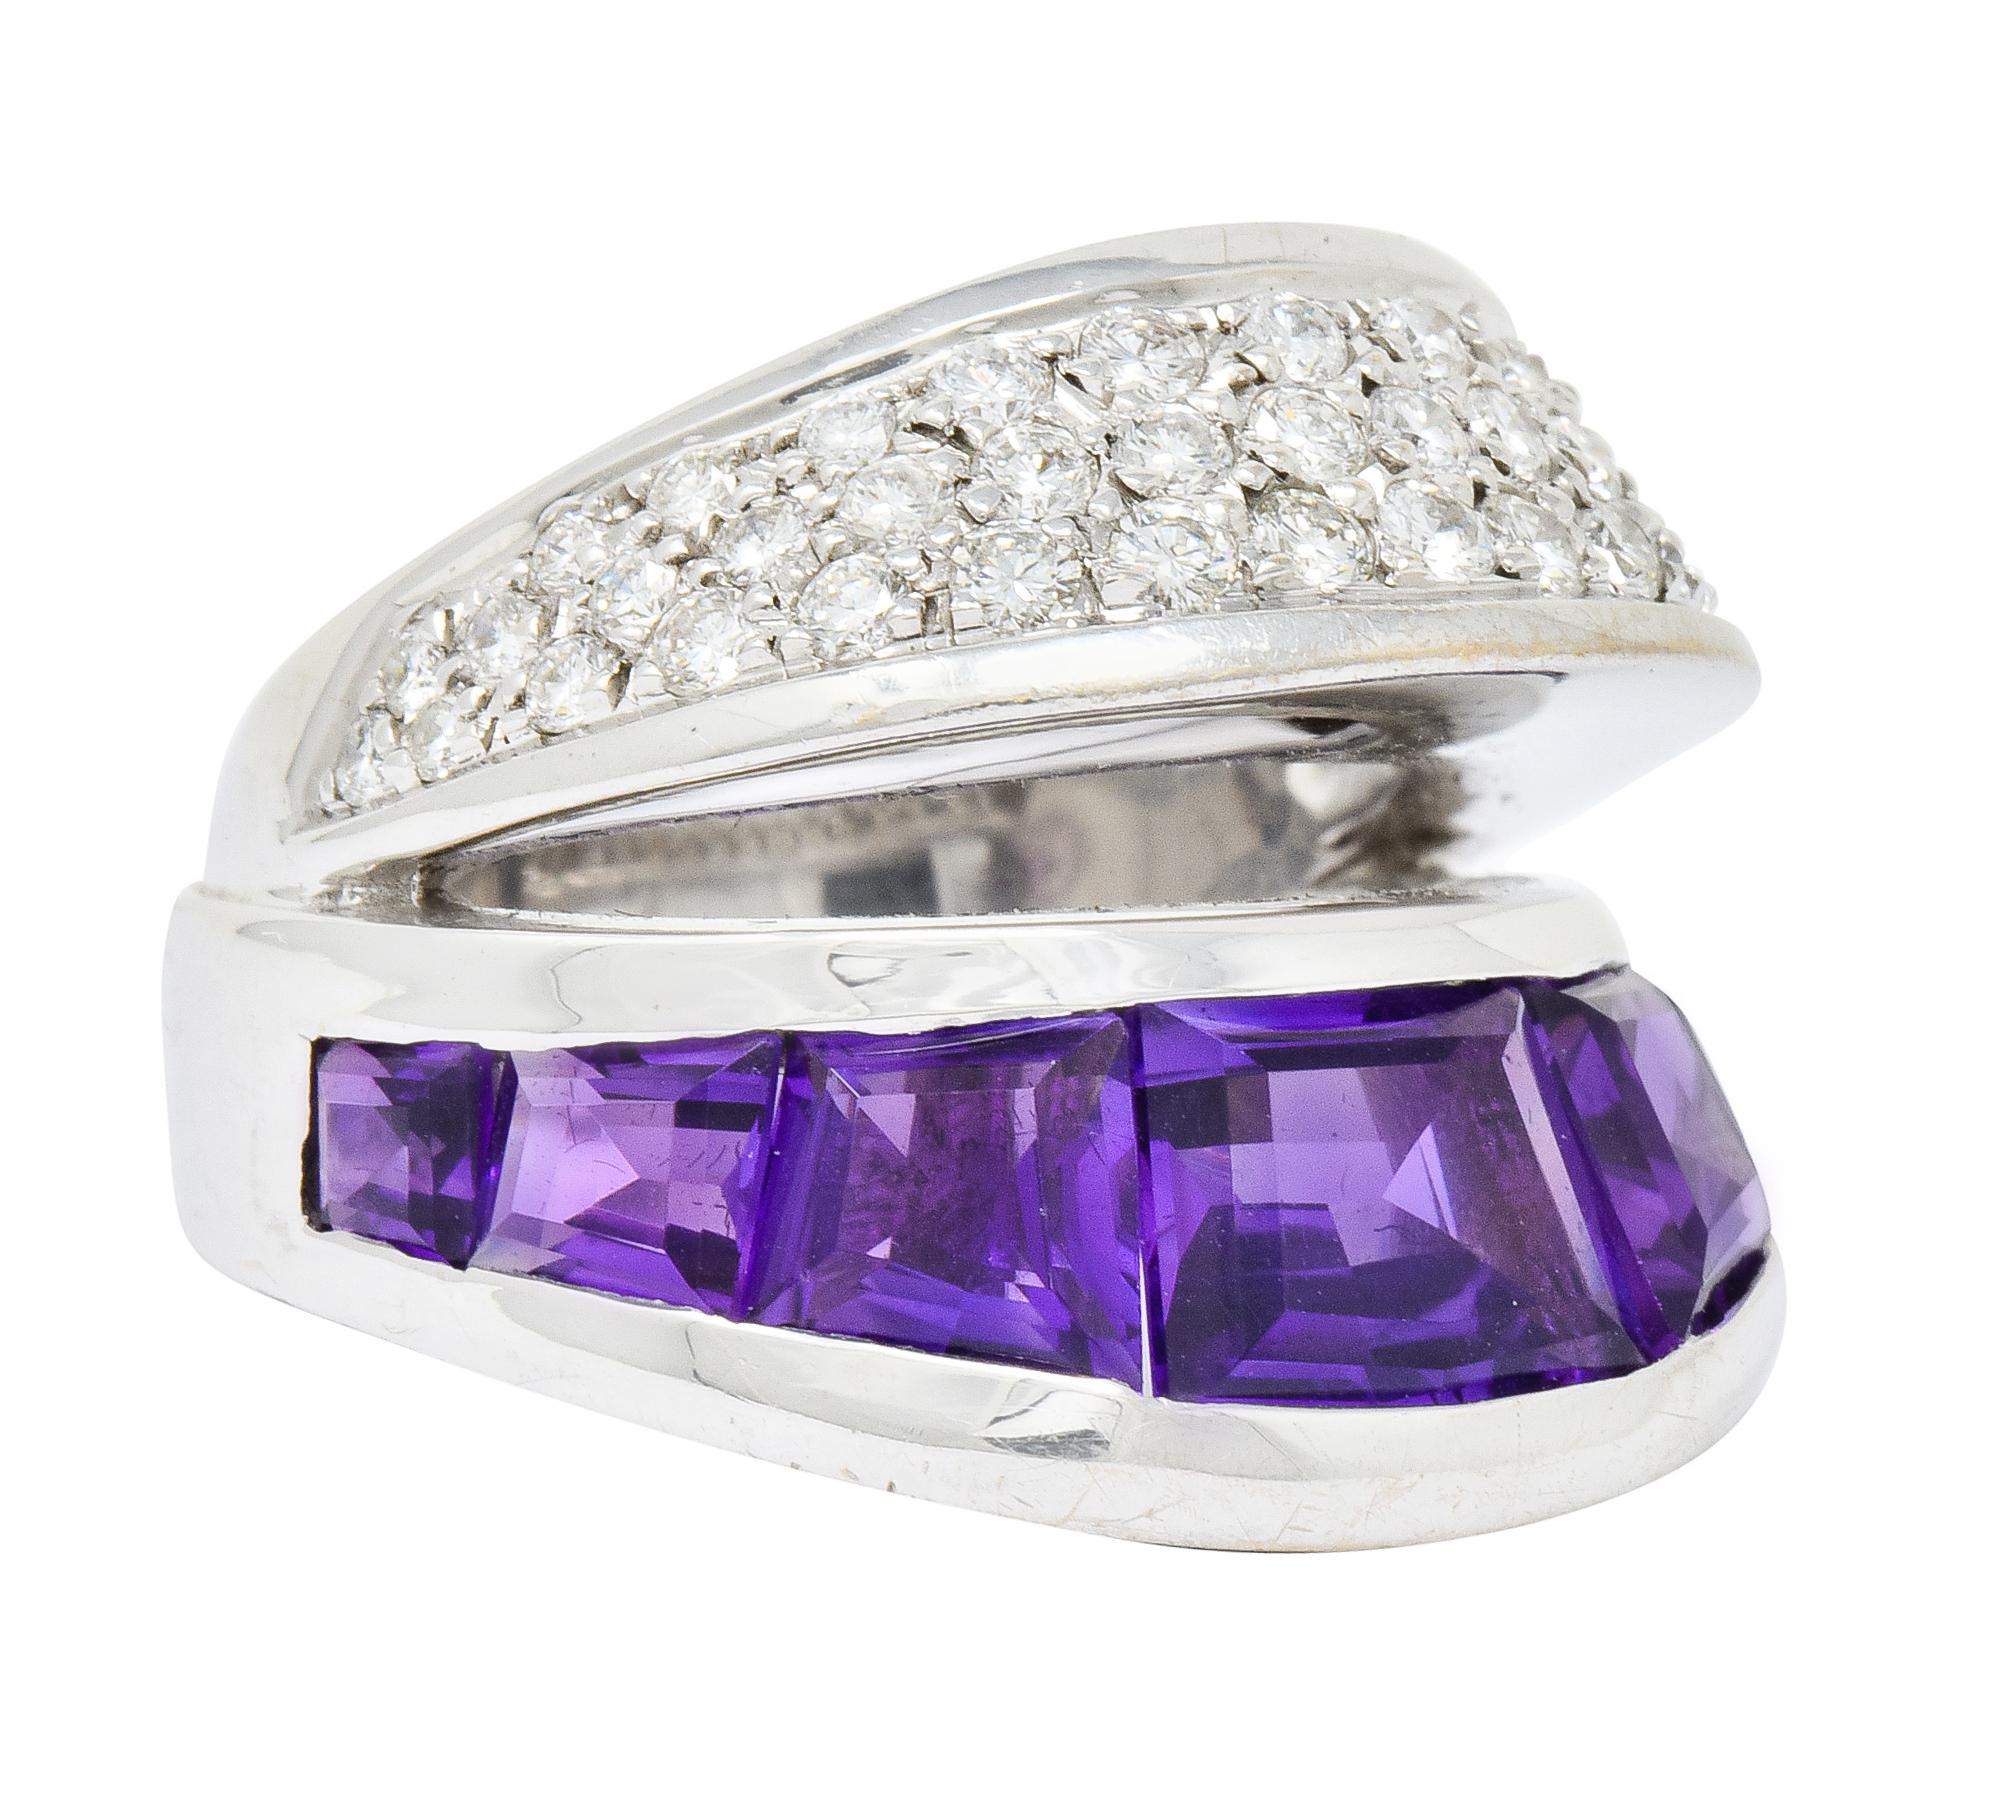 Split band ring comprised of two dynamically angled segments

One segment is channel set with rectangular calibré cut amethyst; a very well-matched deep purple color

Second segment is pavé set with round brilliant cut diamonds weighing